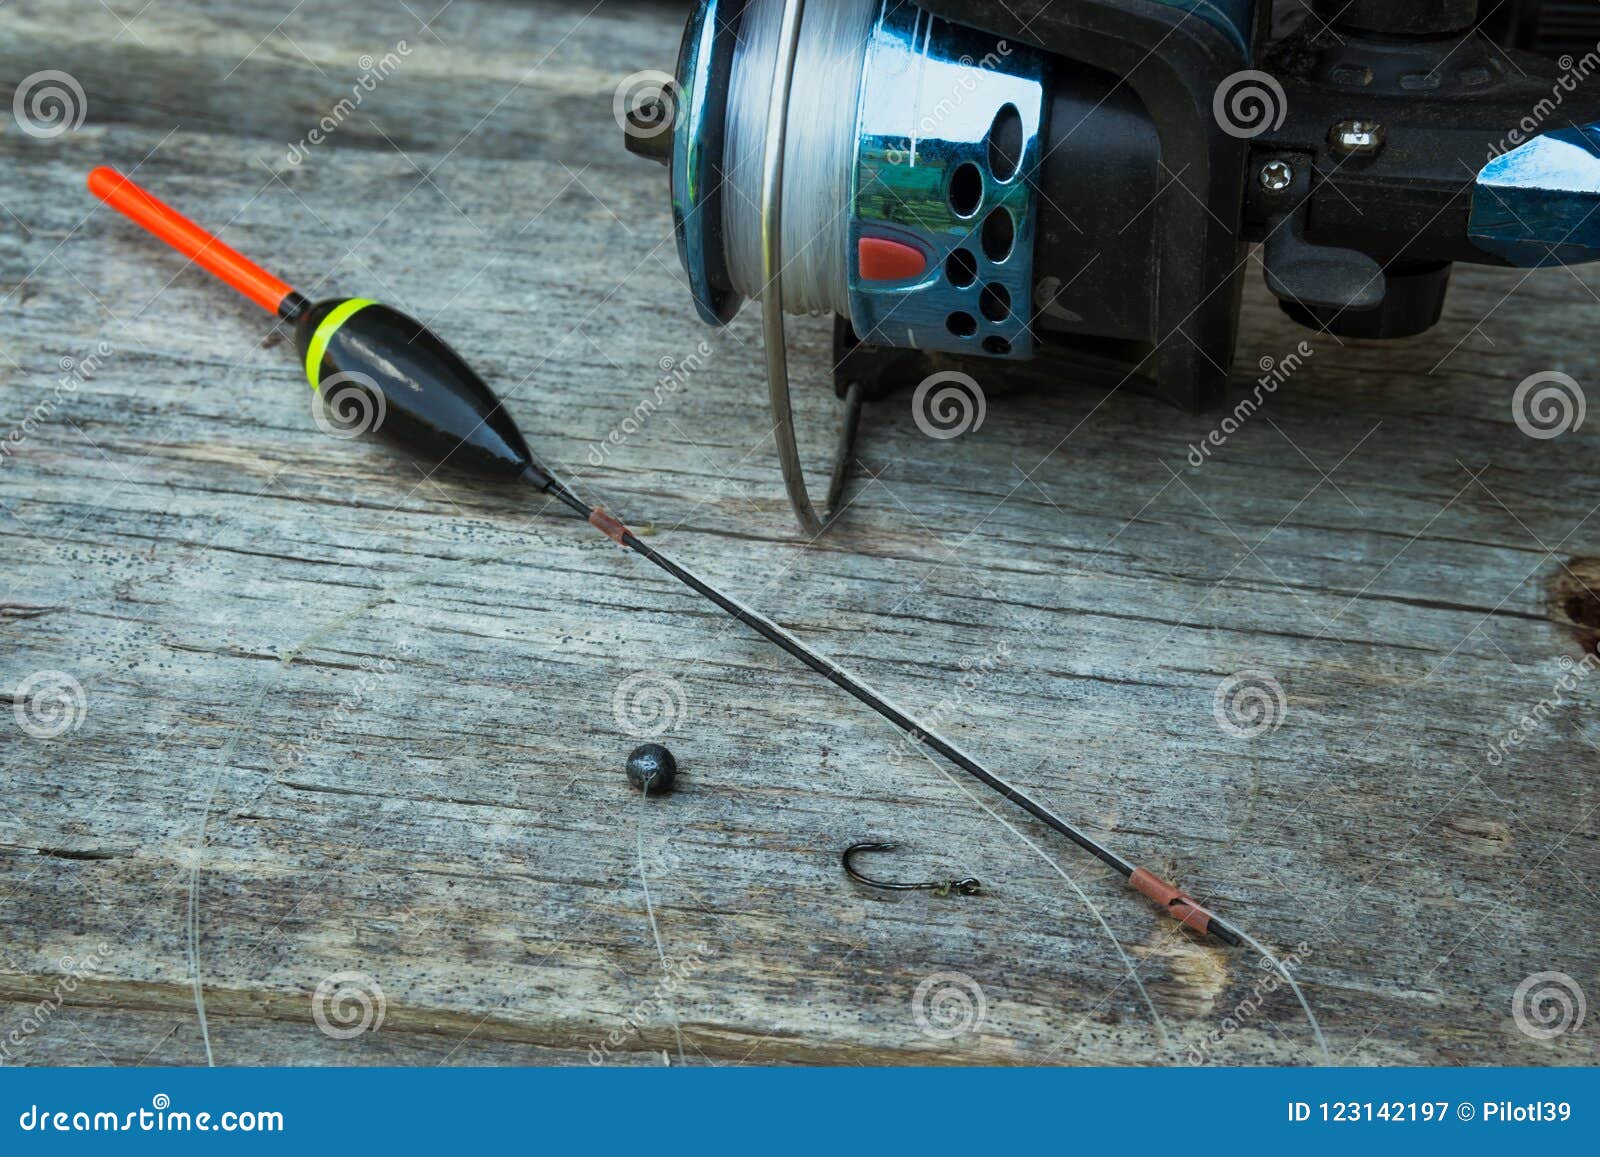 Fishing Tackle Float Fishing Line Sinker And Fishing Hooks On Old Wooden  Boards Stock Photo - Download Image Now - iStock